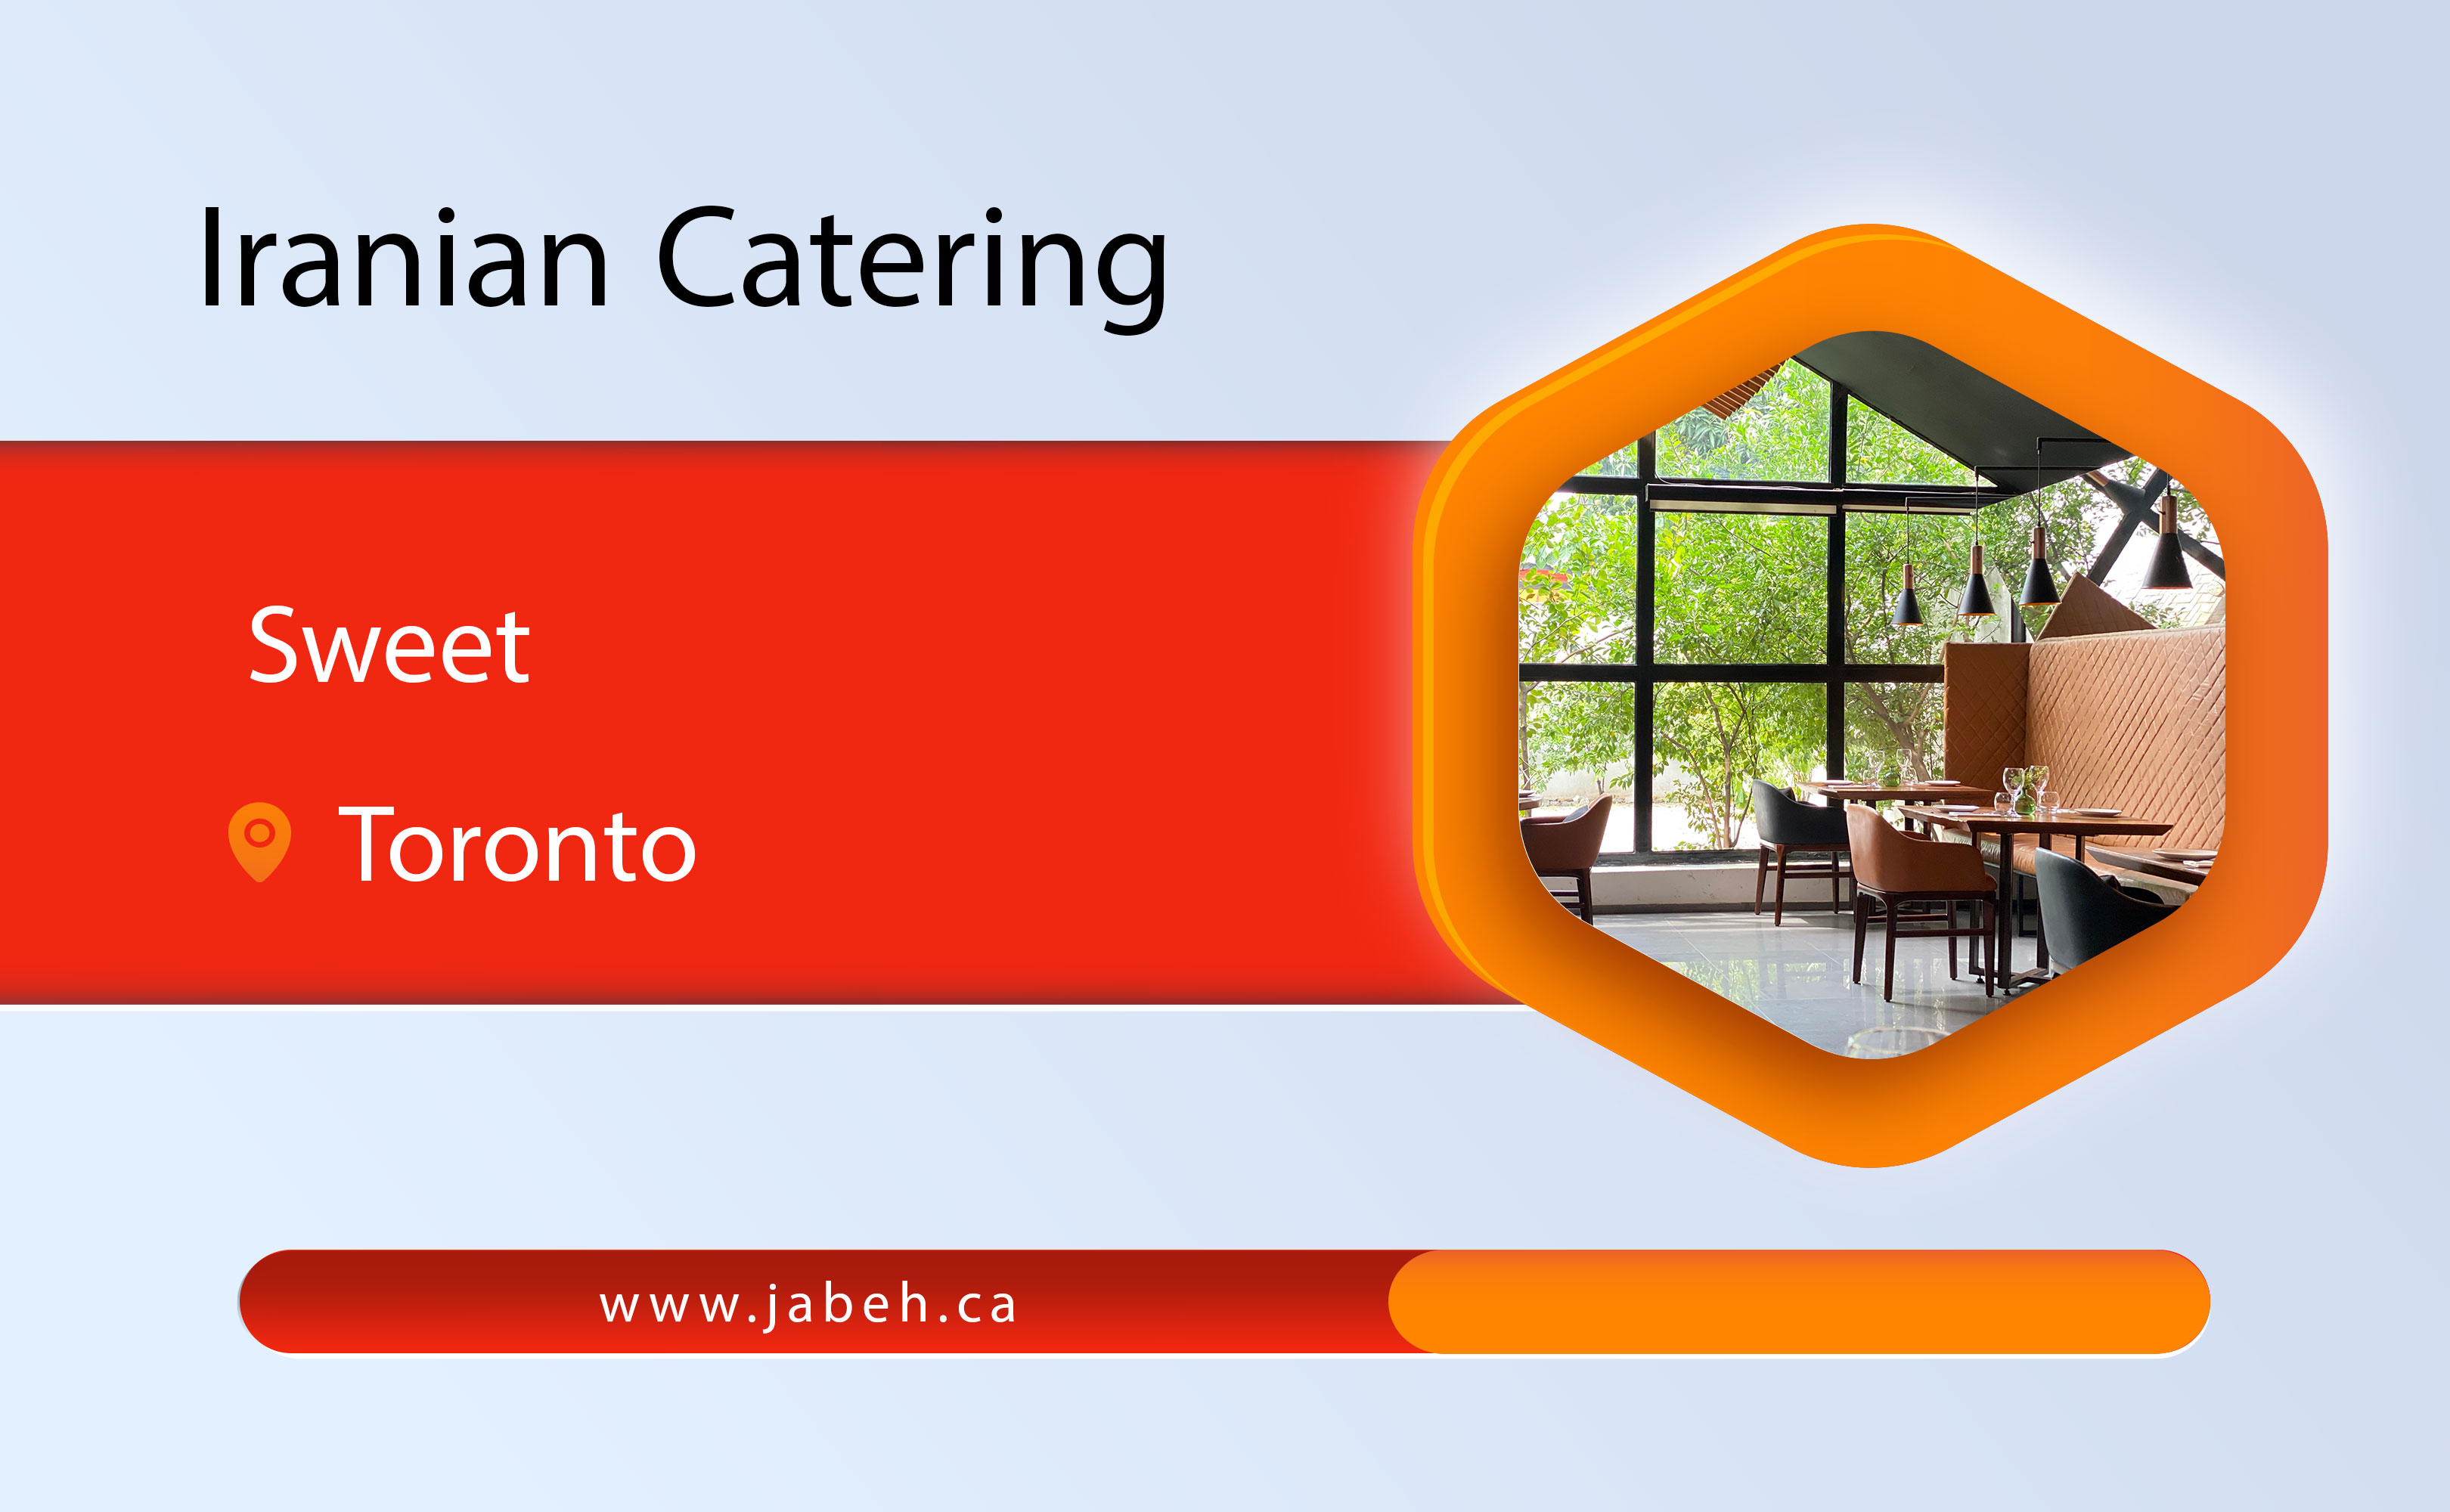 Sweet Iranian catering in Toronto